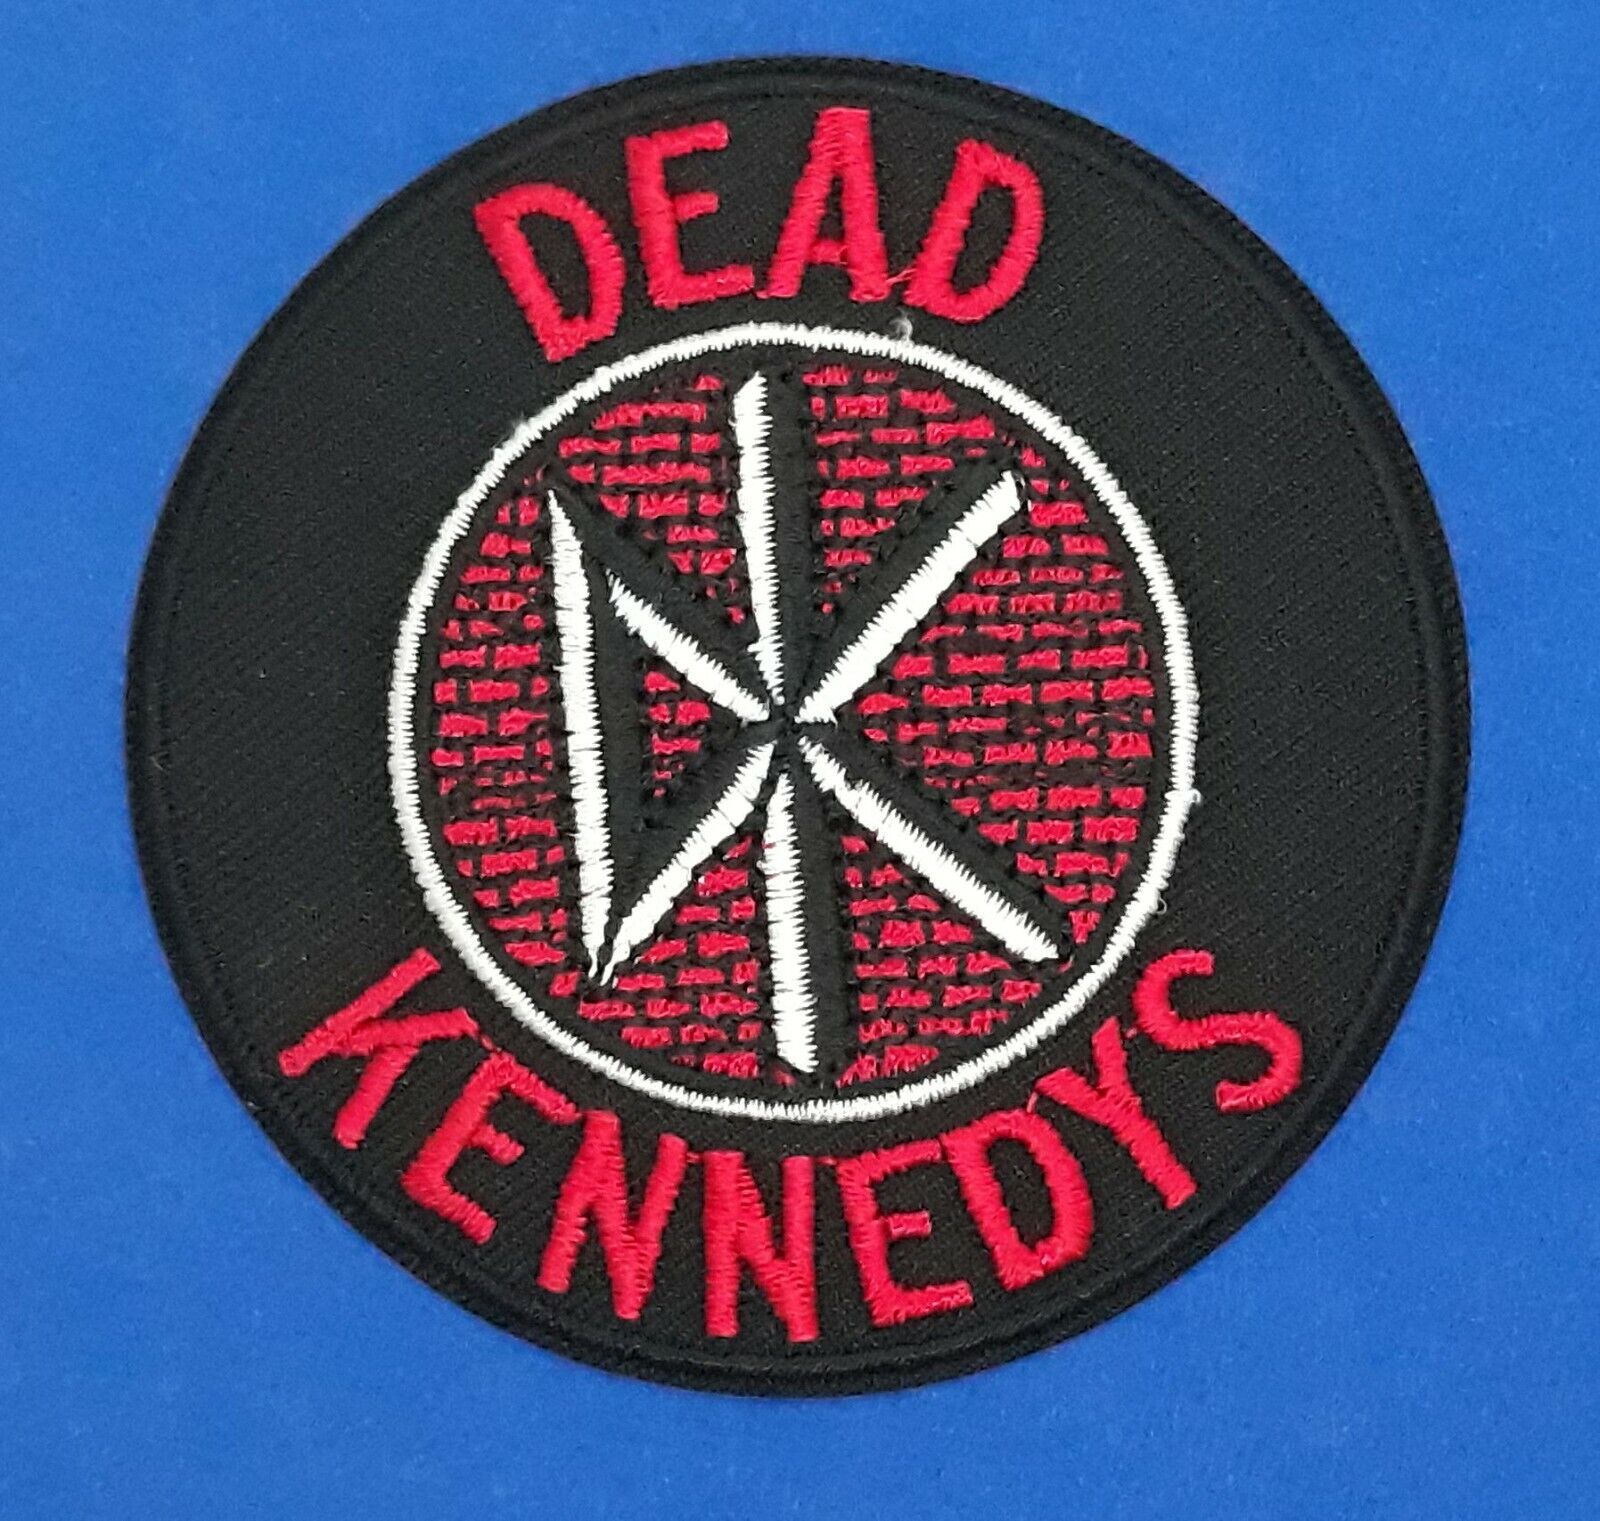 Dead Kennedys Round  Logo  Iron On Sew On Embroidered Patch 3"x 3"